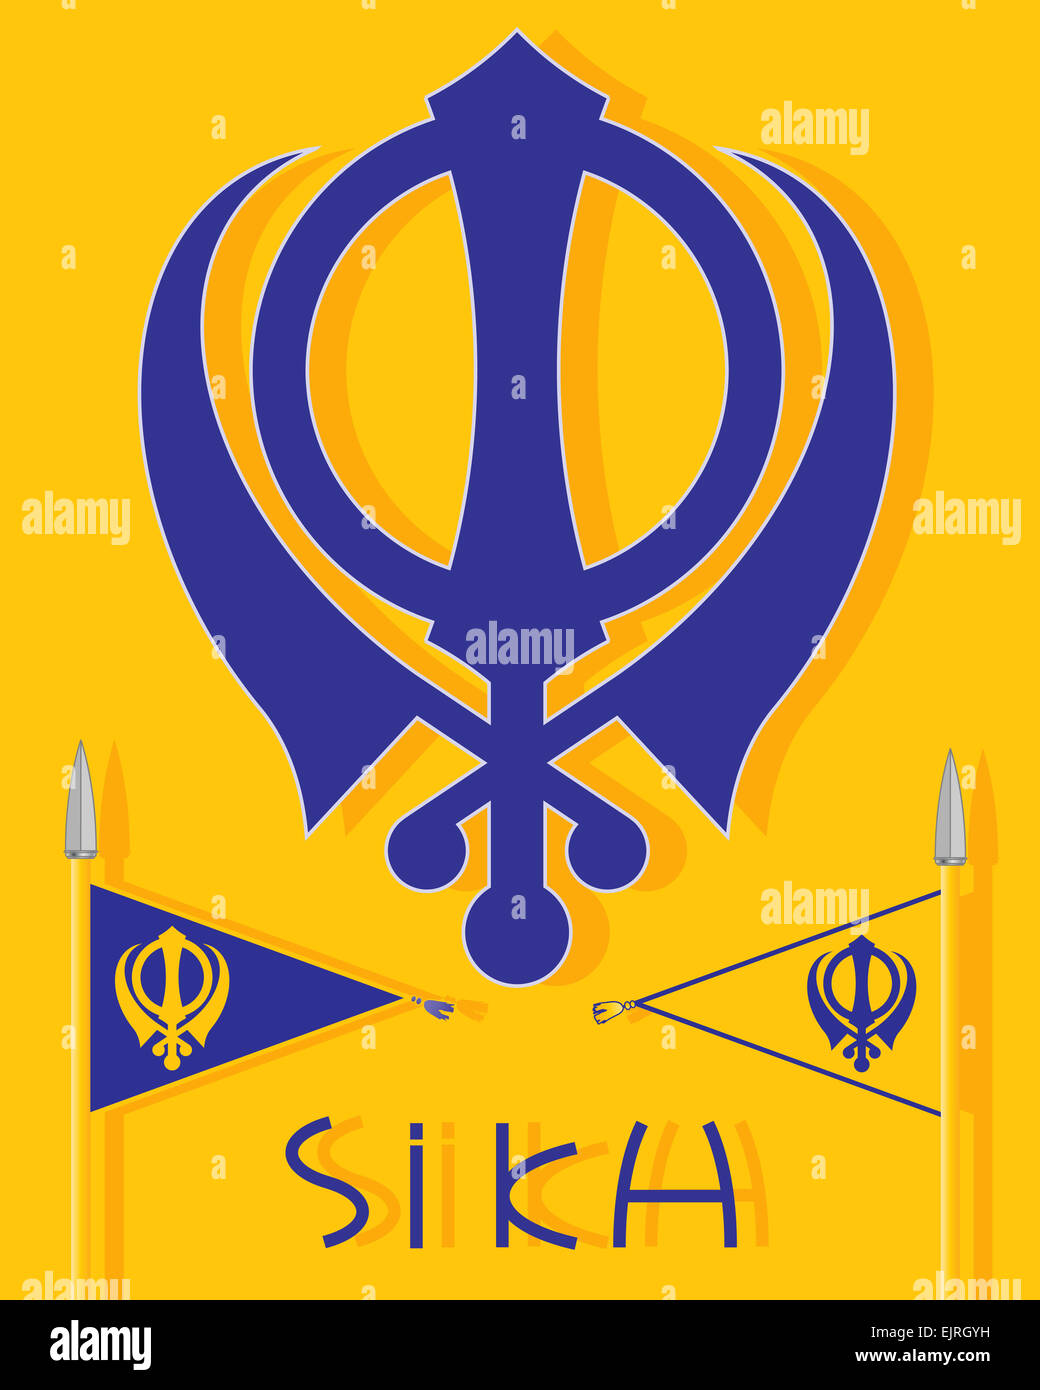 an illustration of Sikh insignia with military emblem the Nishan Sahib flags and the word Sikh on a saffron background Stock Photo